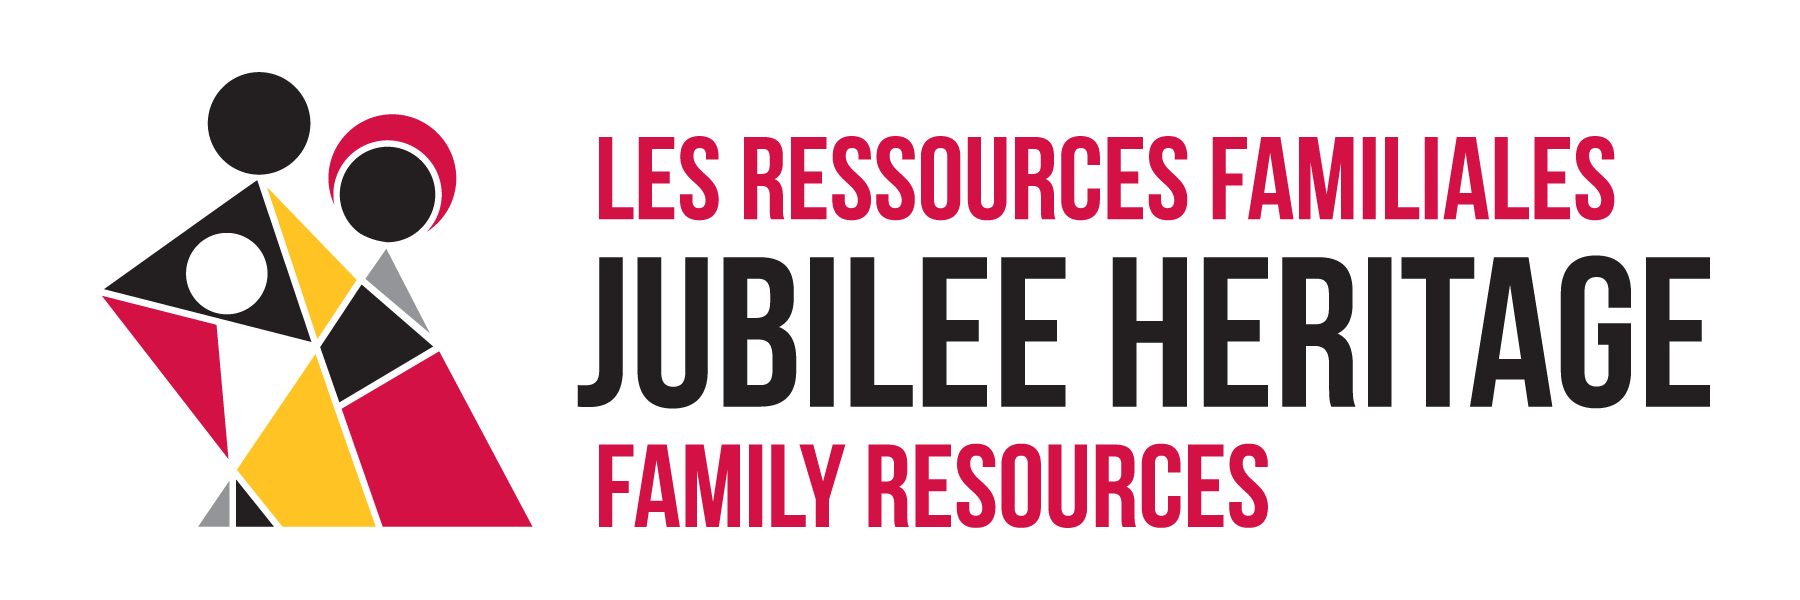 Jubilee Heritage Family Resources